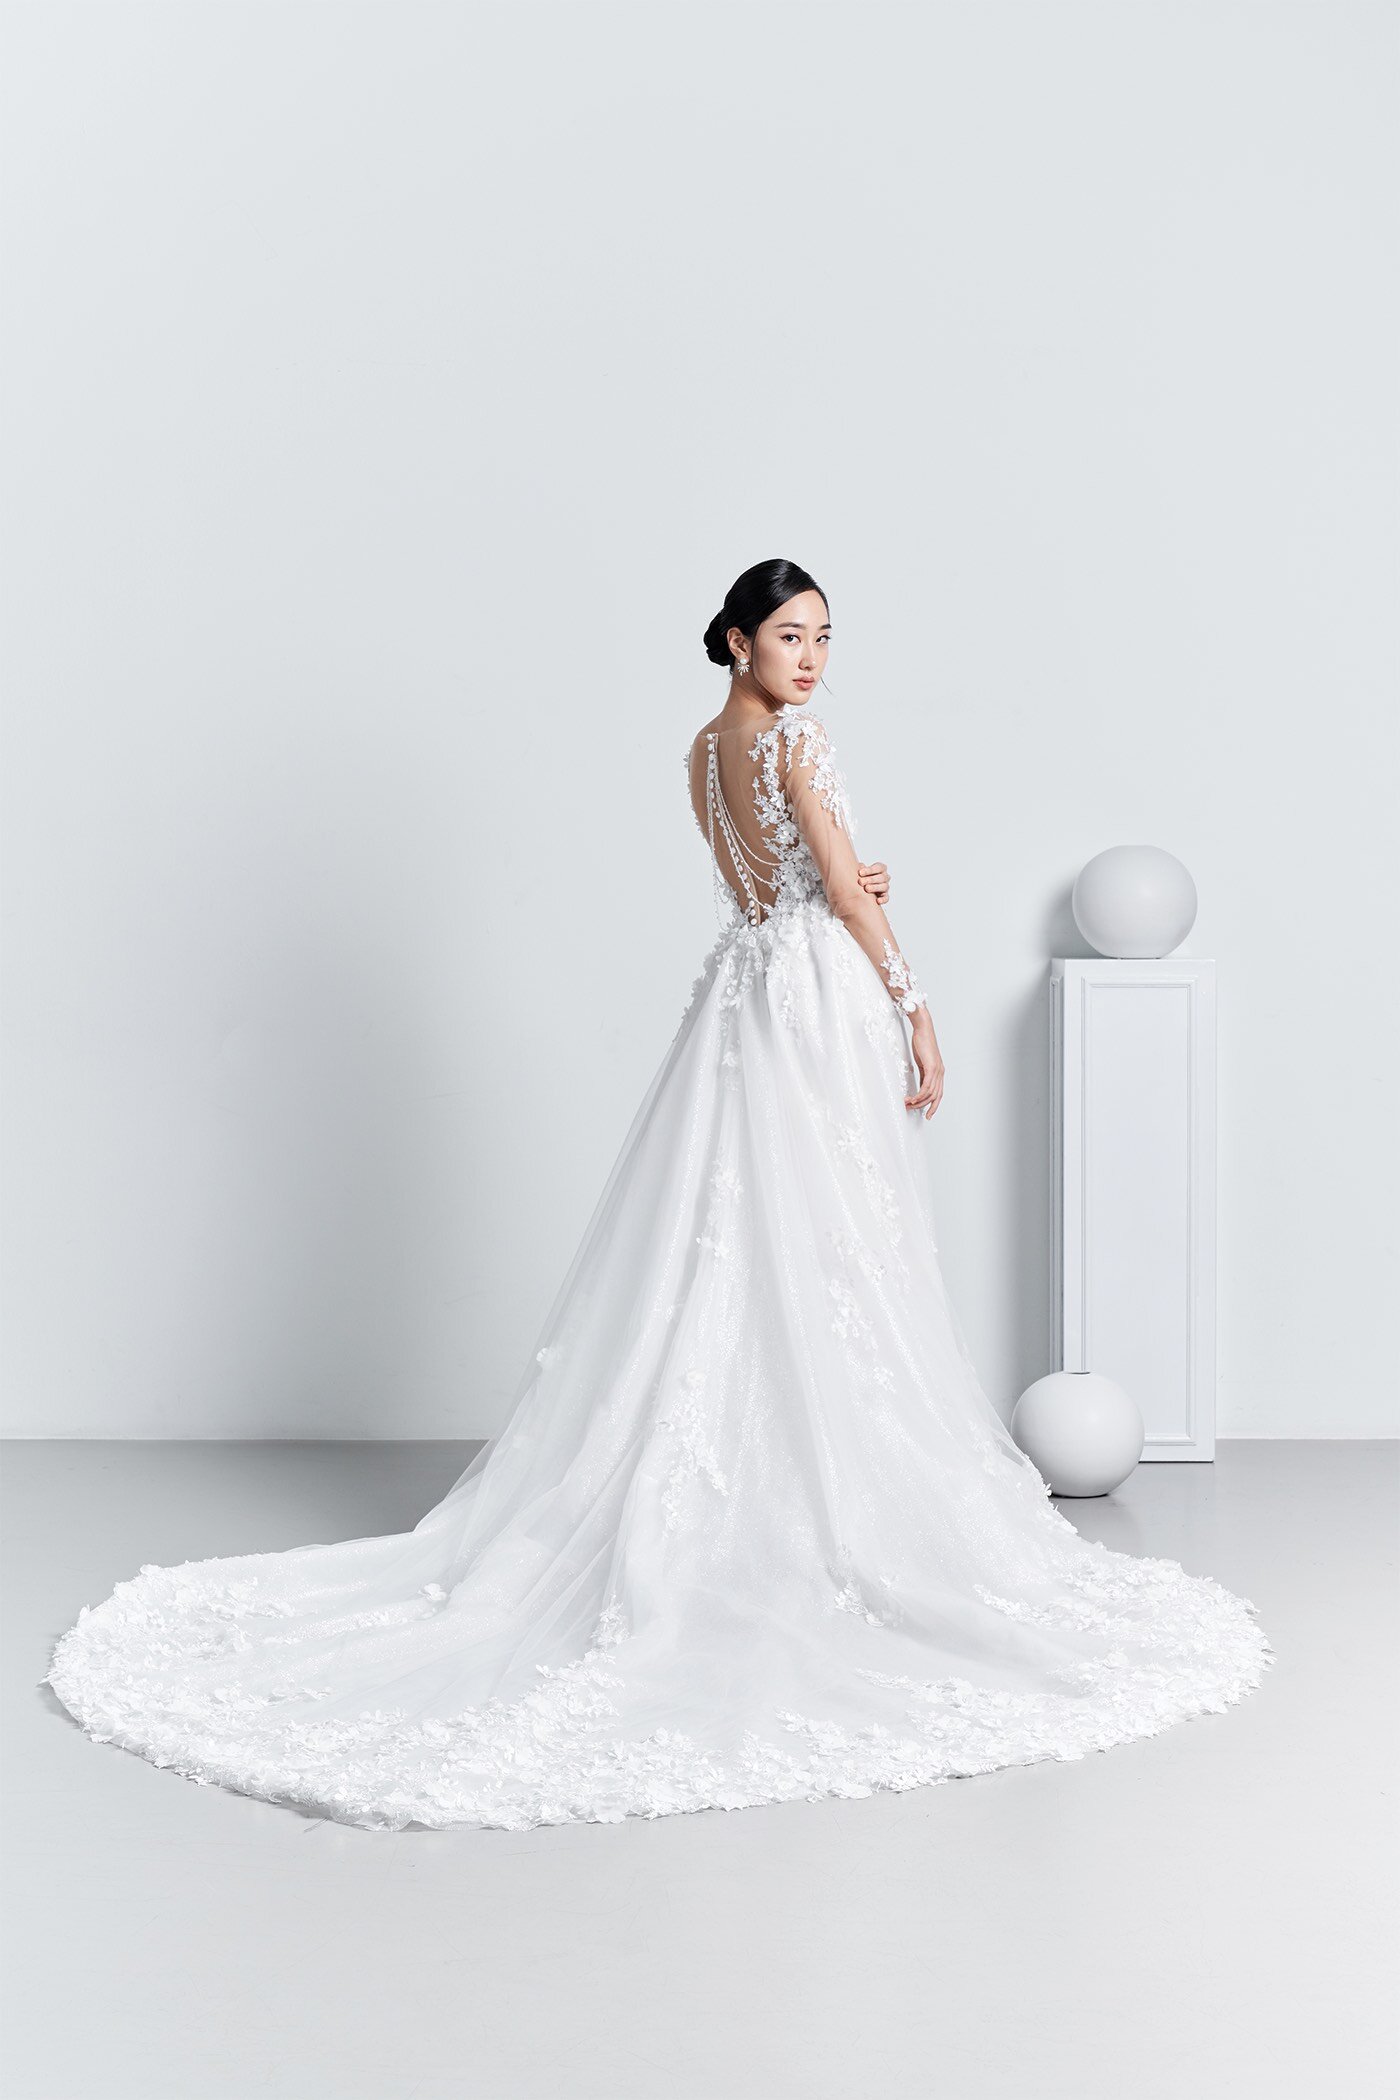 10 wedding dresses under $500 that'll have you looking classy on a budget -  Her World Singapore